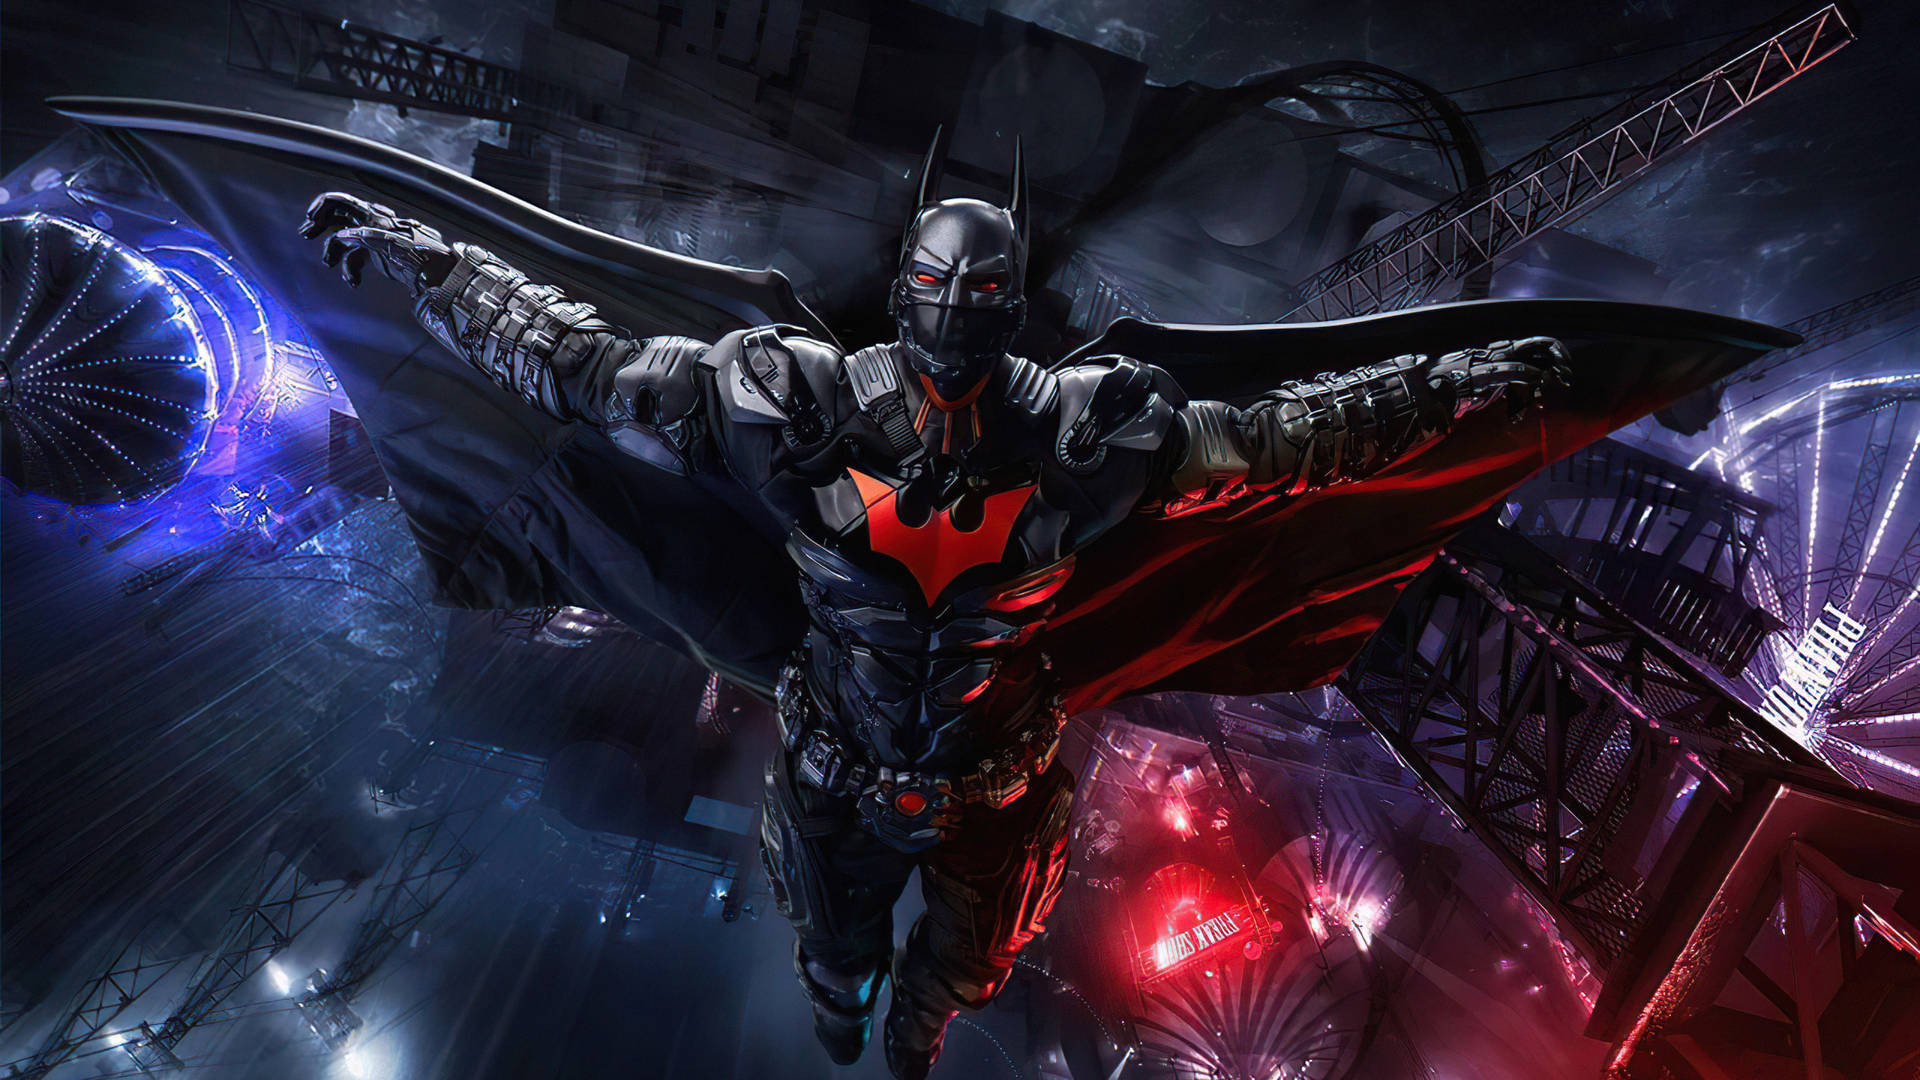 Embrace the Dark Knight's Heroism with this 2560x1440 Batman Wallpaper Wallpaper